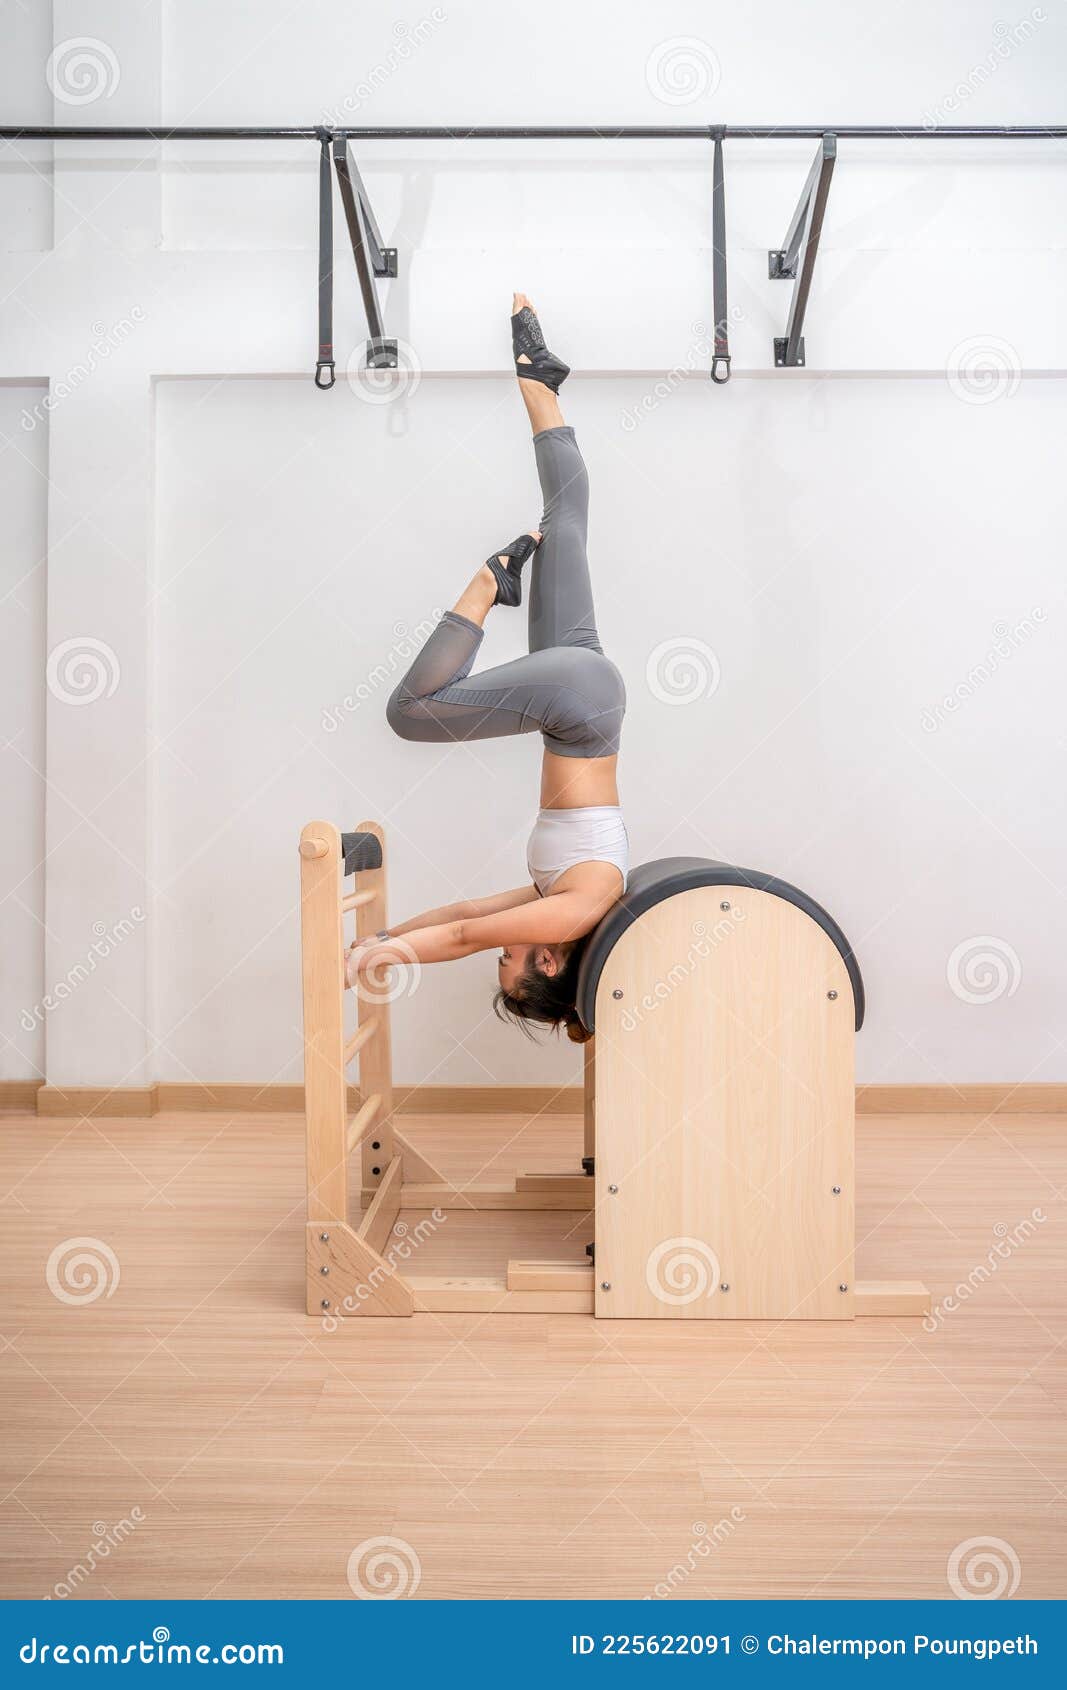 Young Asian Woman Working on Pilates Ladder Barrel Machine during